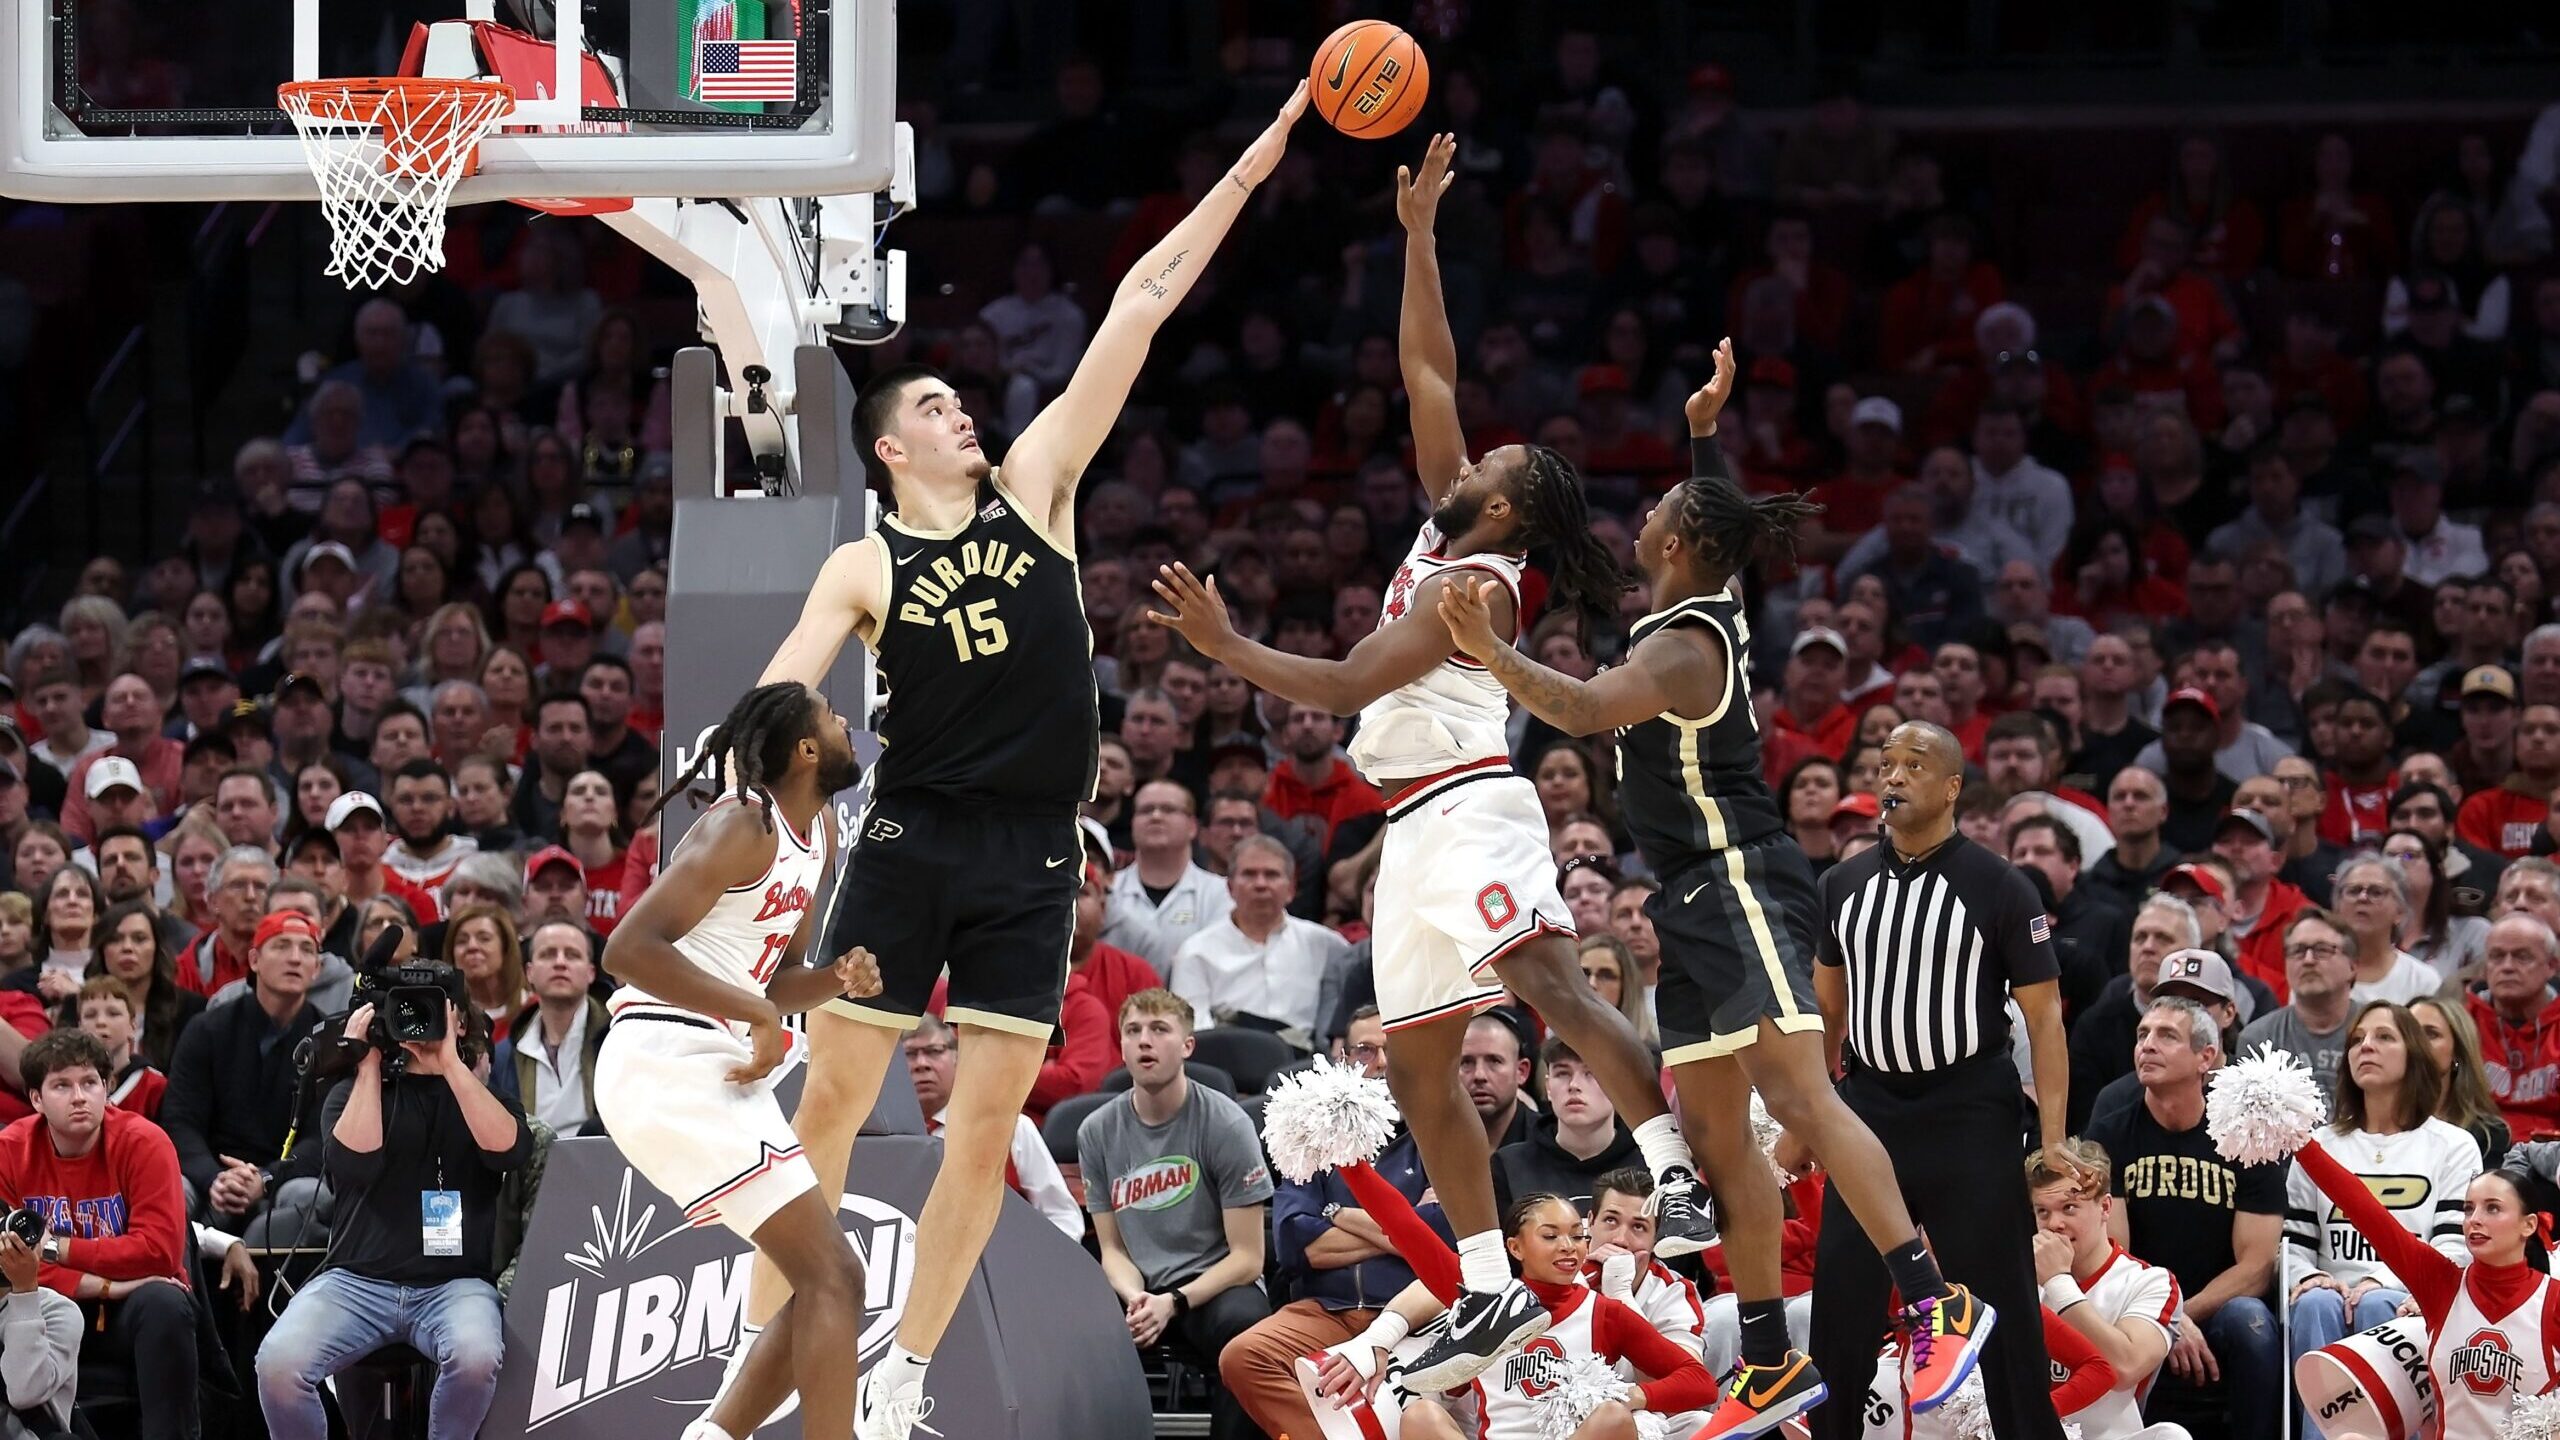 Zach Edey of the Purdue Boilermakers blocks a shot during the second half of a game against Ohio St...